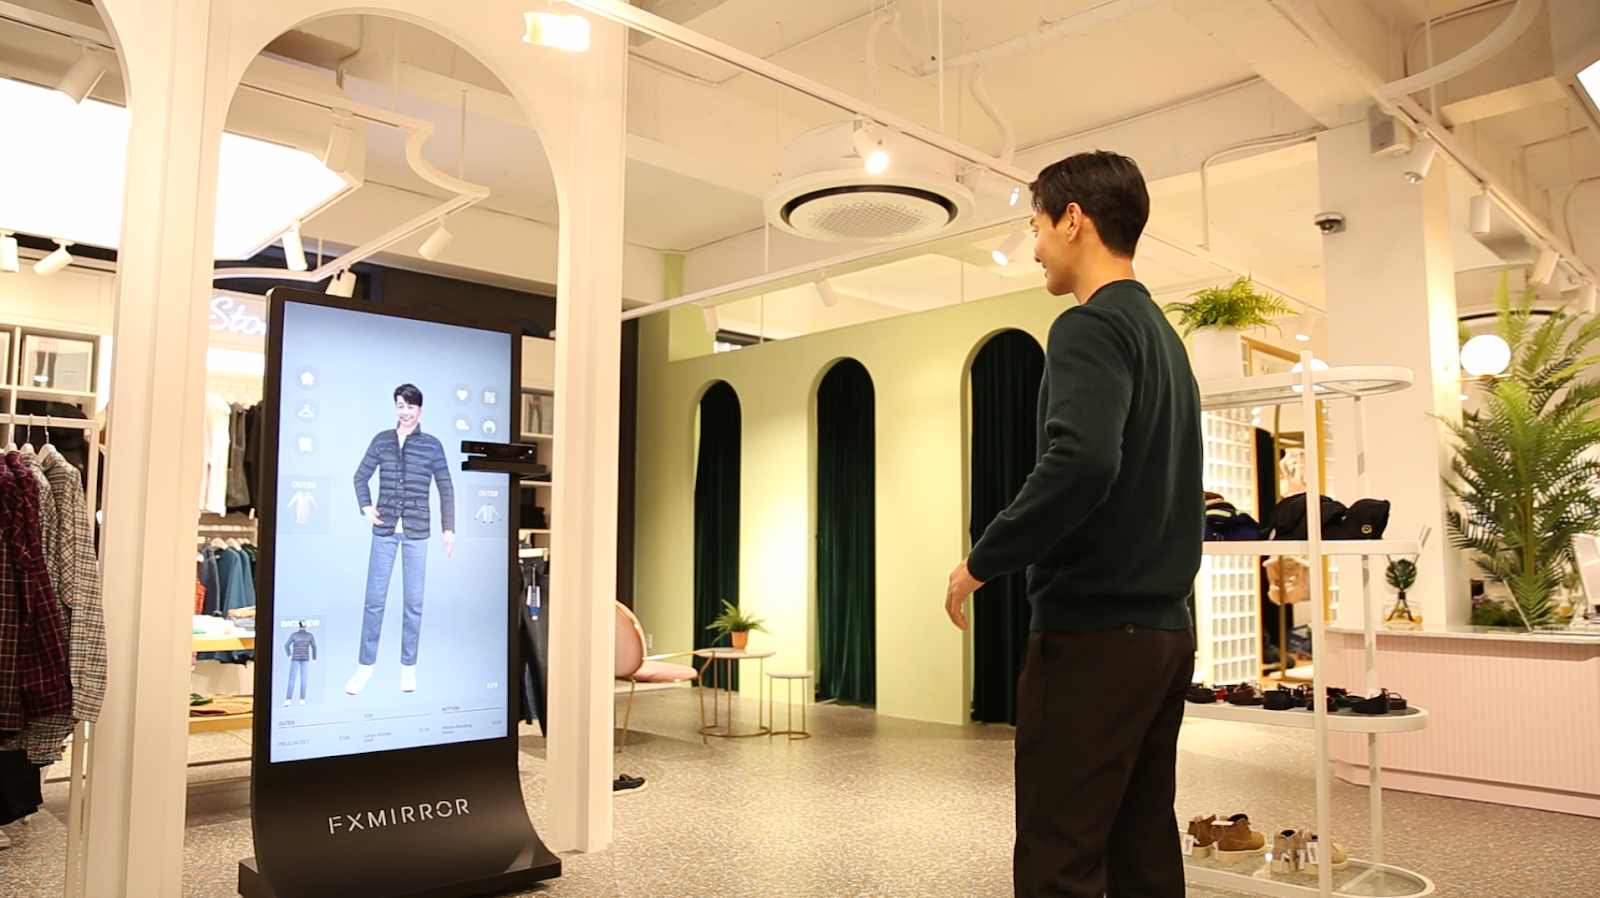 Retail digital signage has expanded into augmented and virtual reality. Source: Newswire